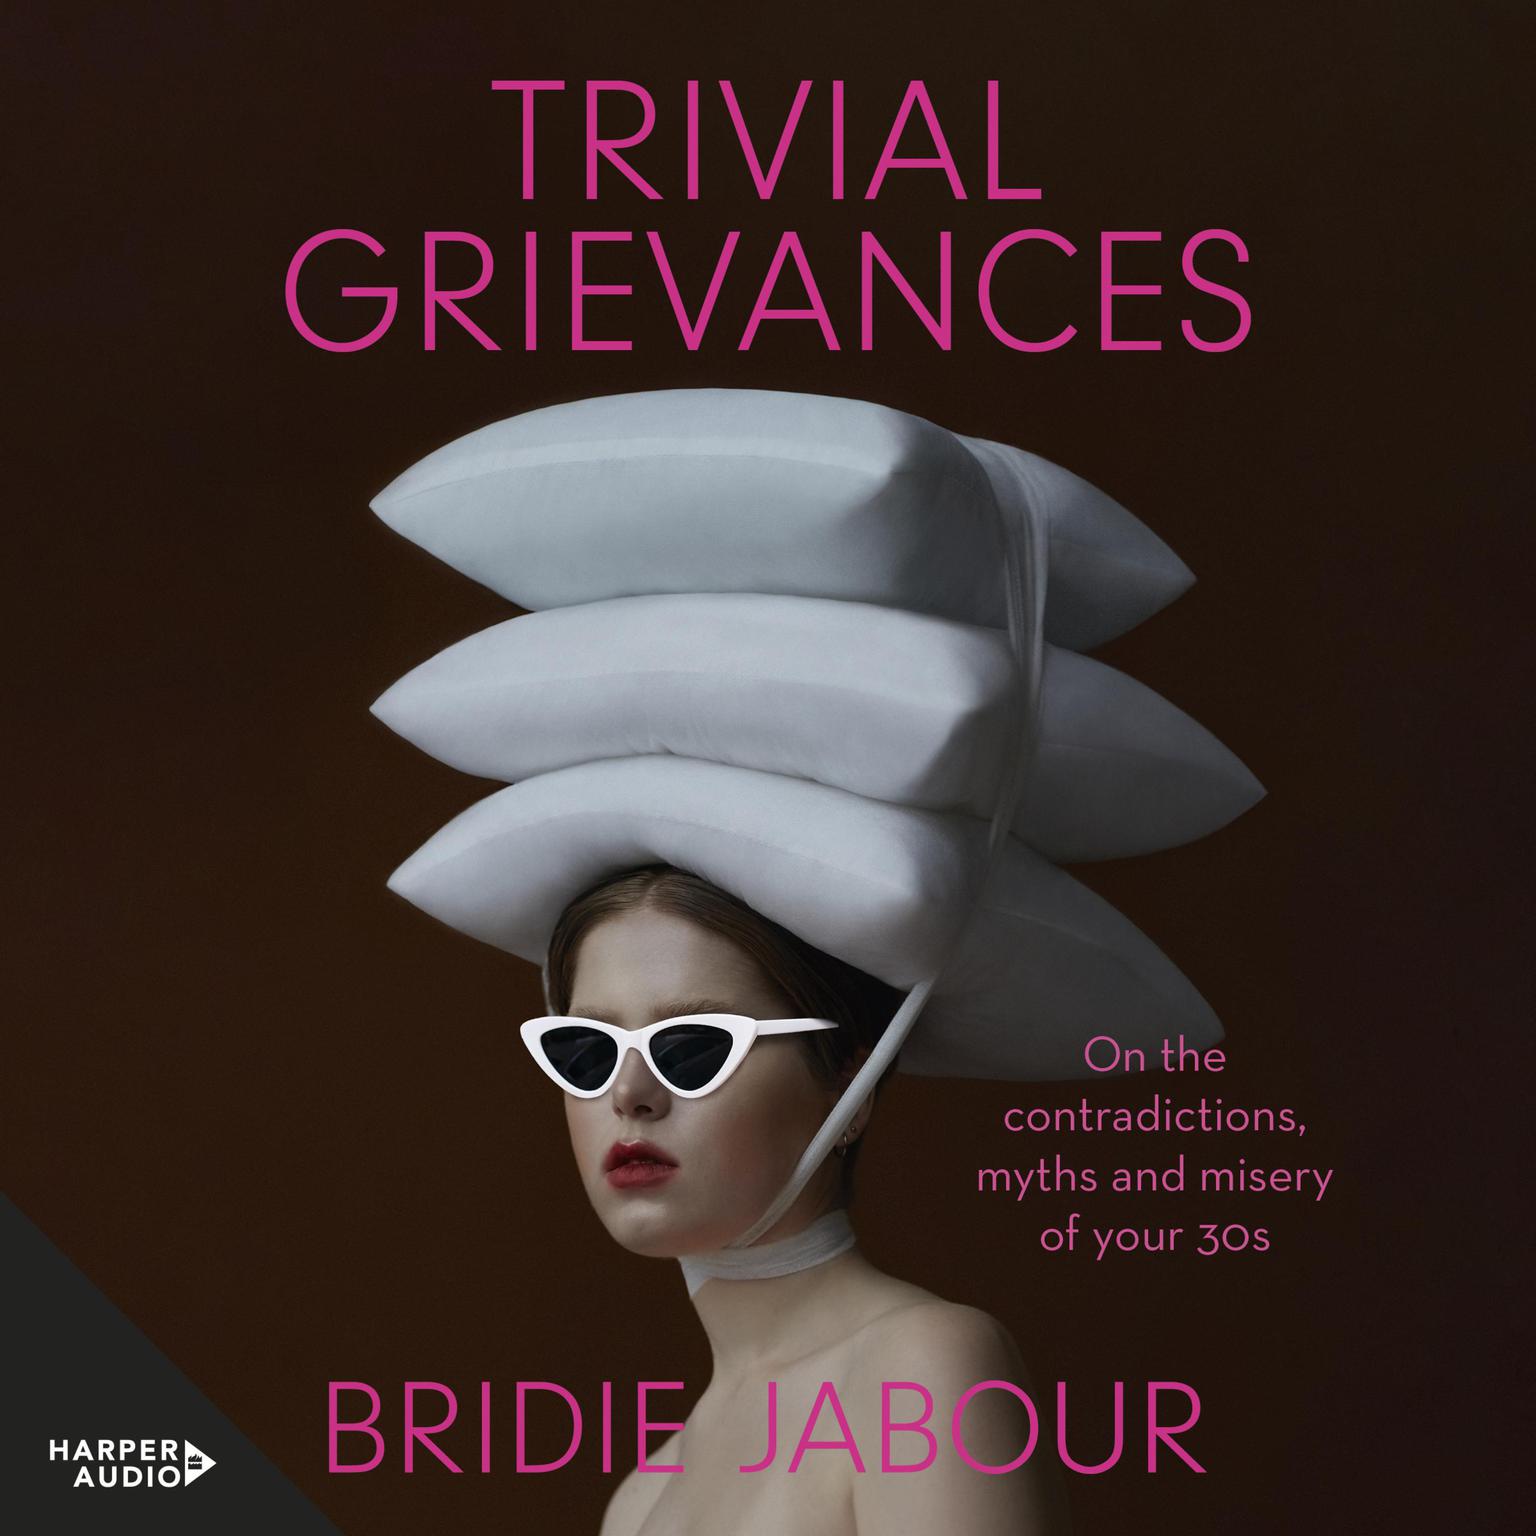 Trivial Grievances: On the contradictions, myths and misery of your 30s Audiobook, by Bridie Jabour